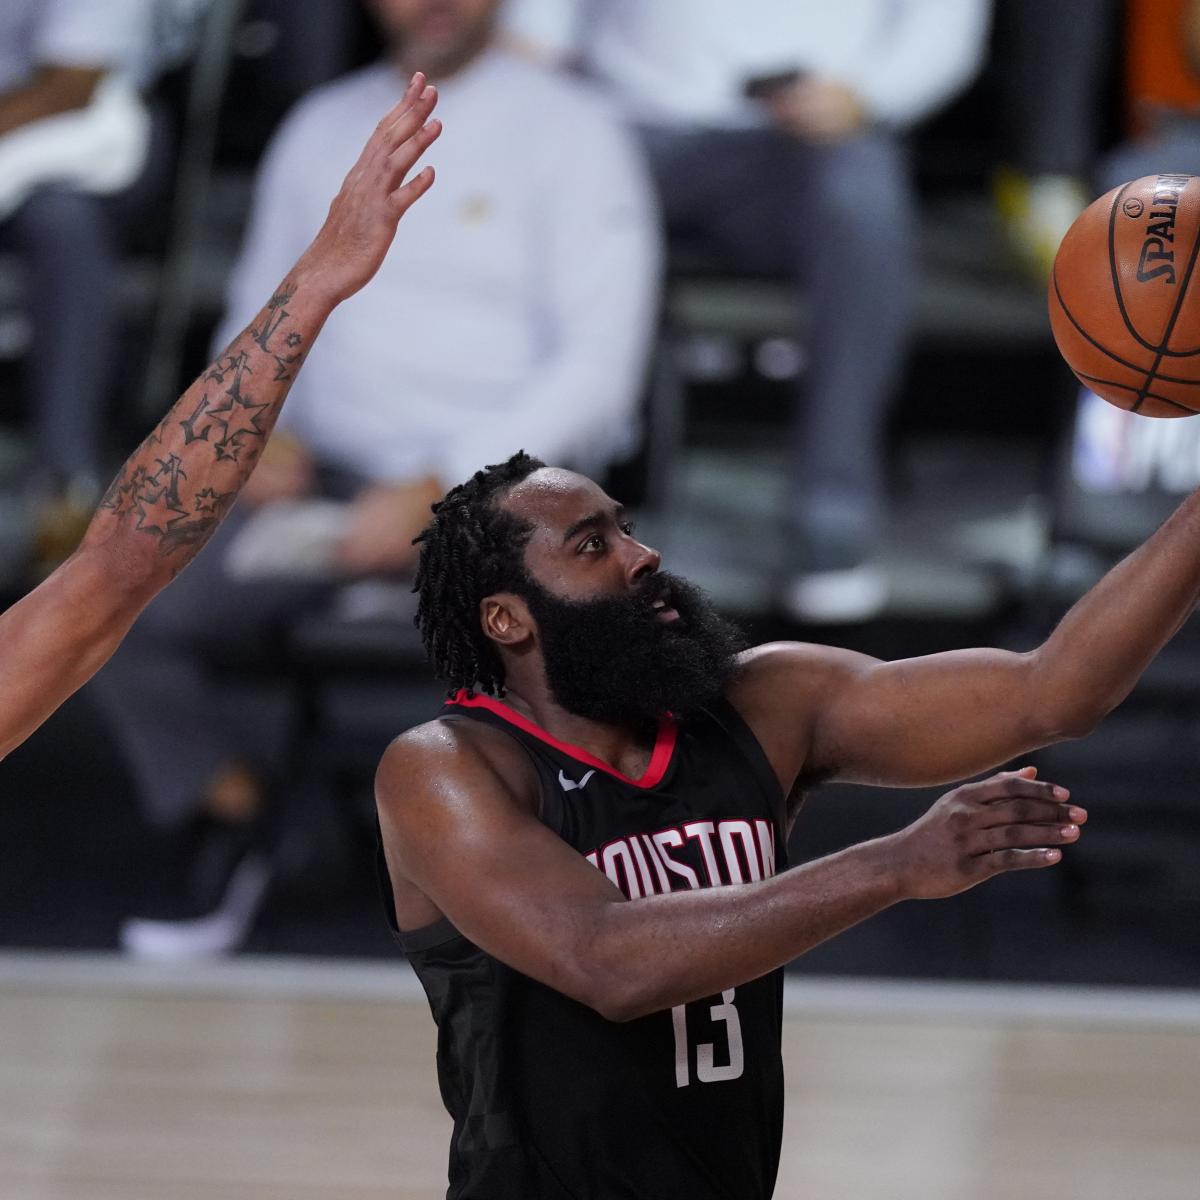 LeBron James: James Harden Is Potentially Considered one of the vital Most effective Offensive Gamers Ever